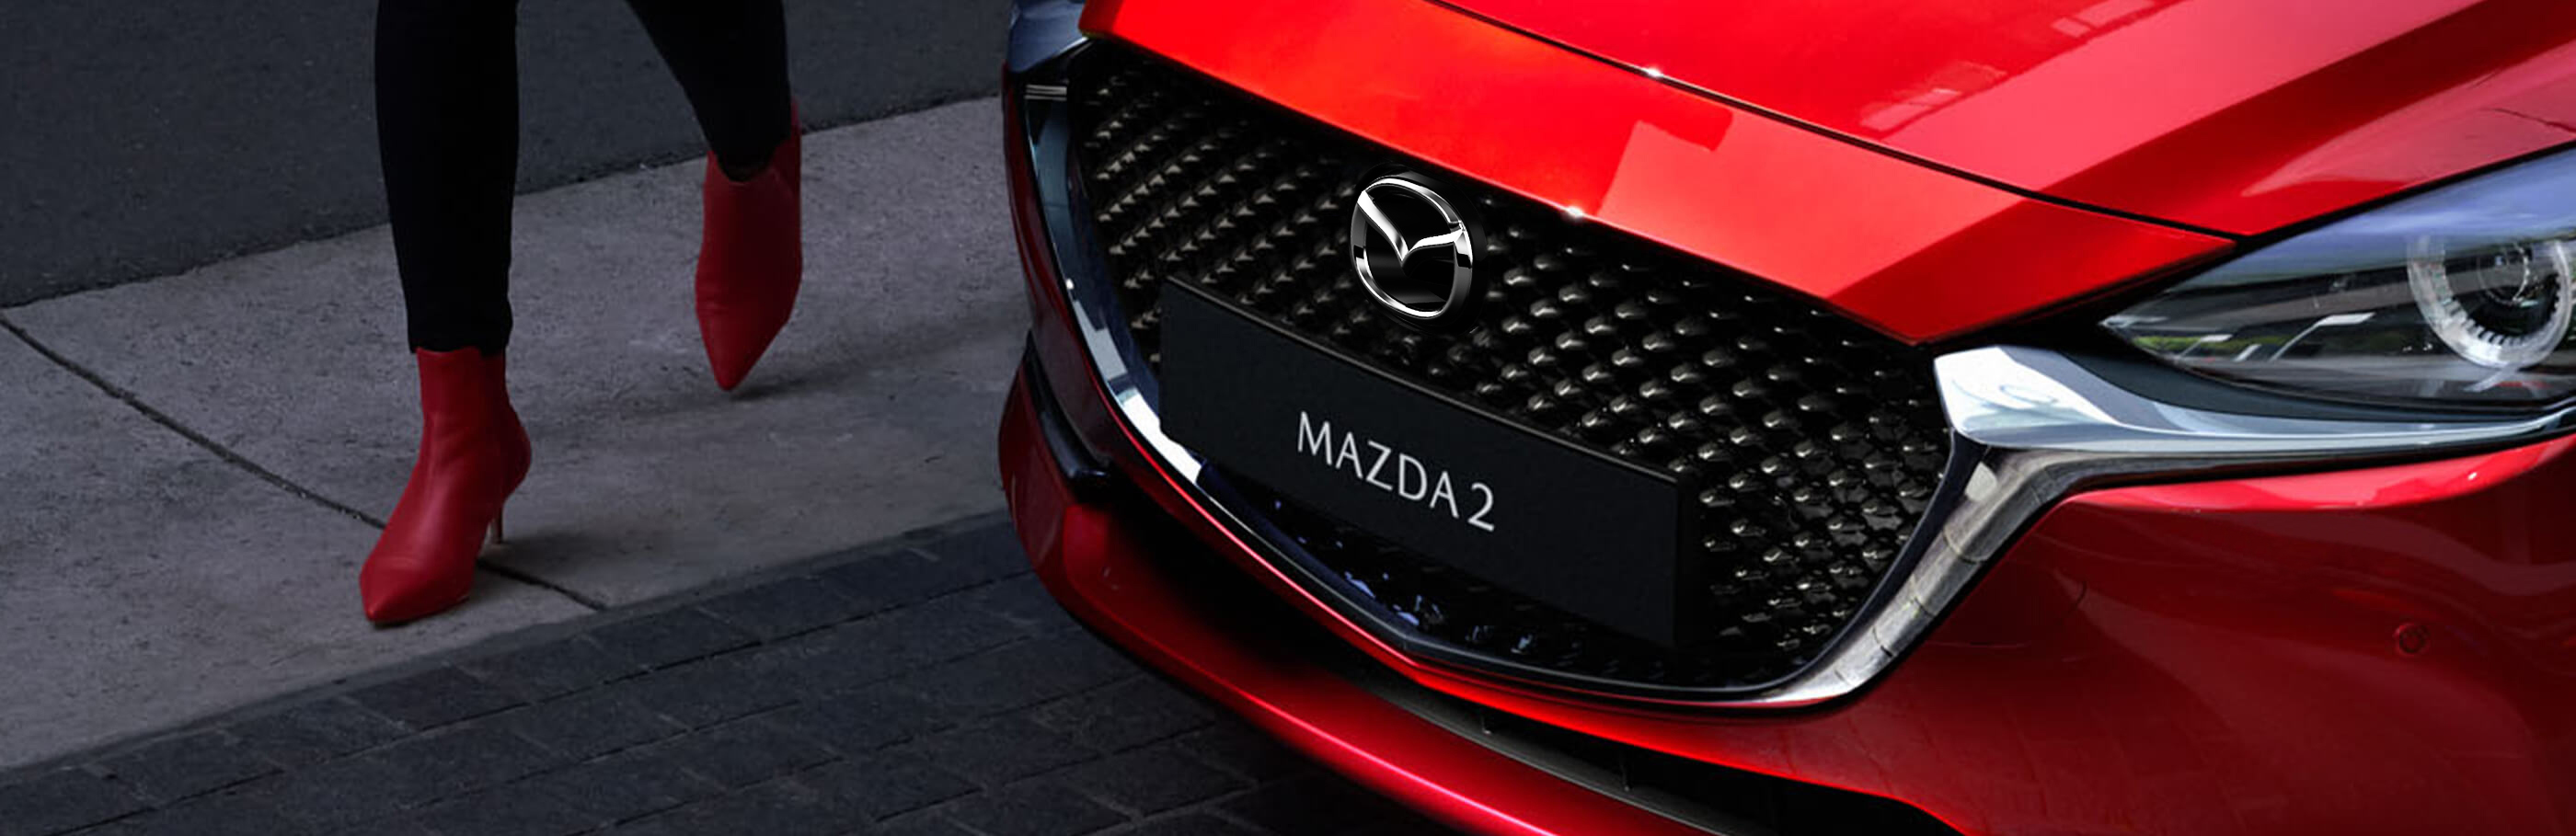 Mazda2 Front Grill